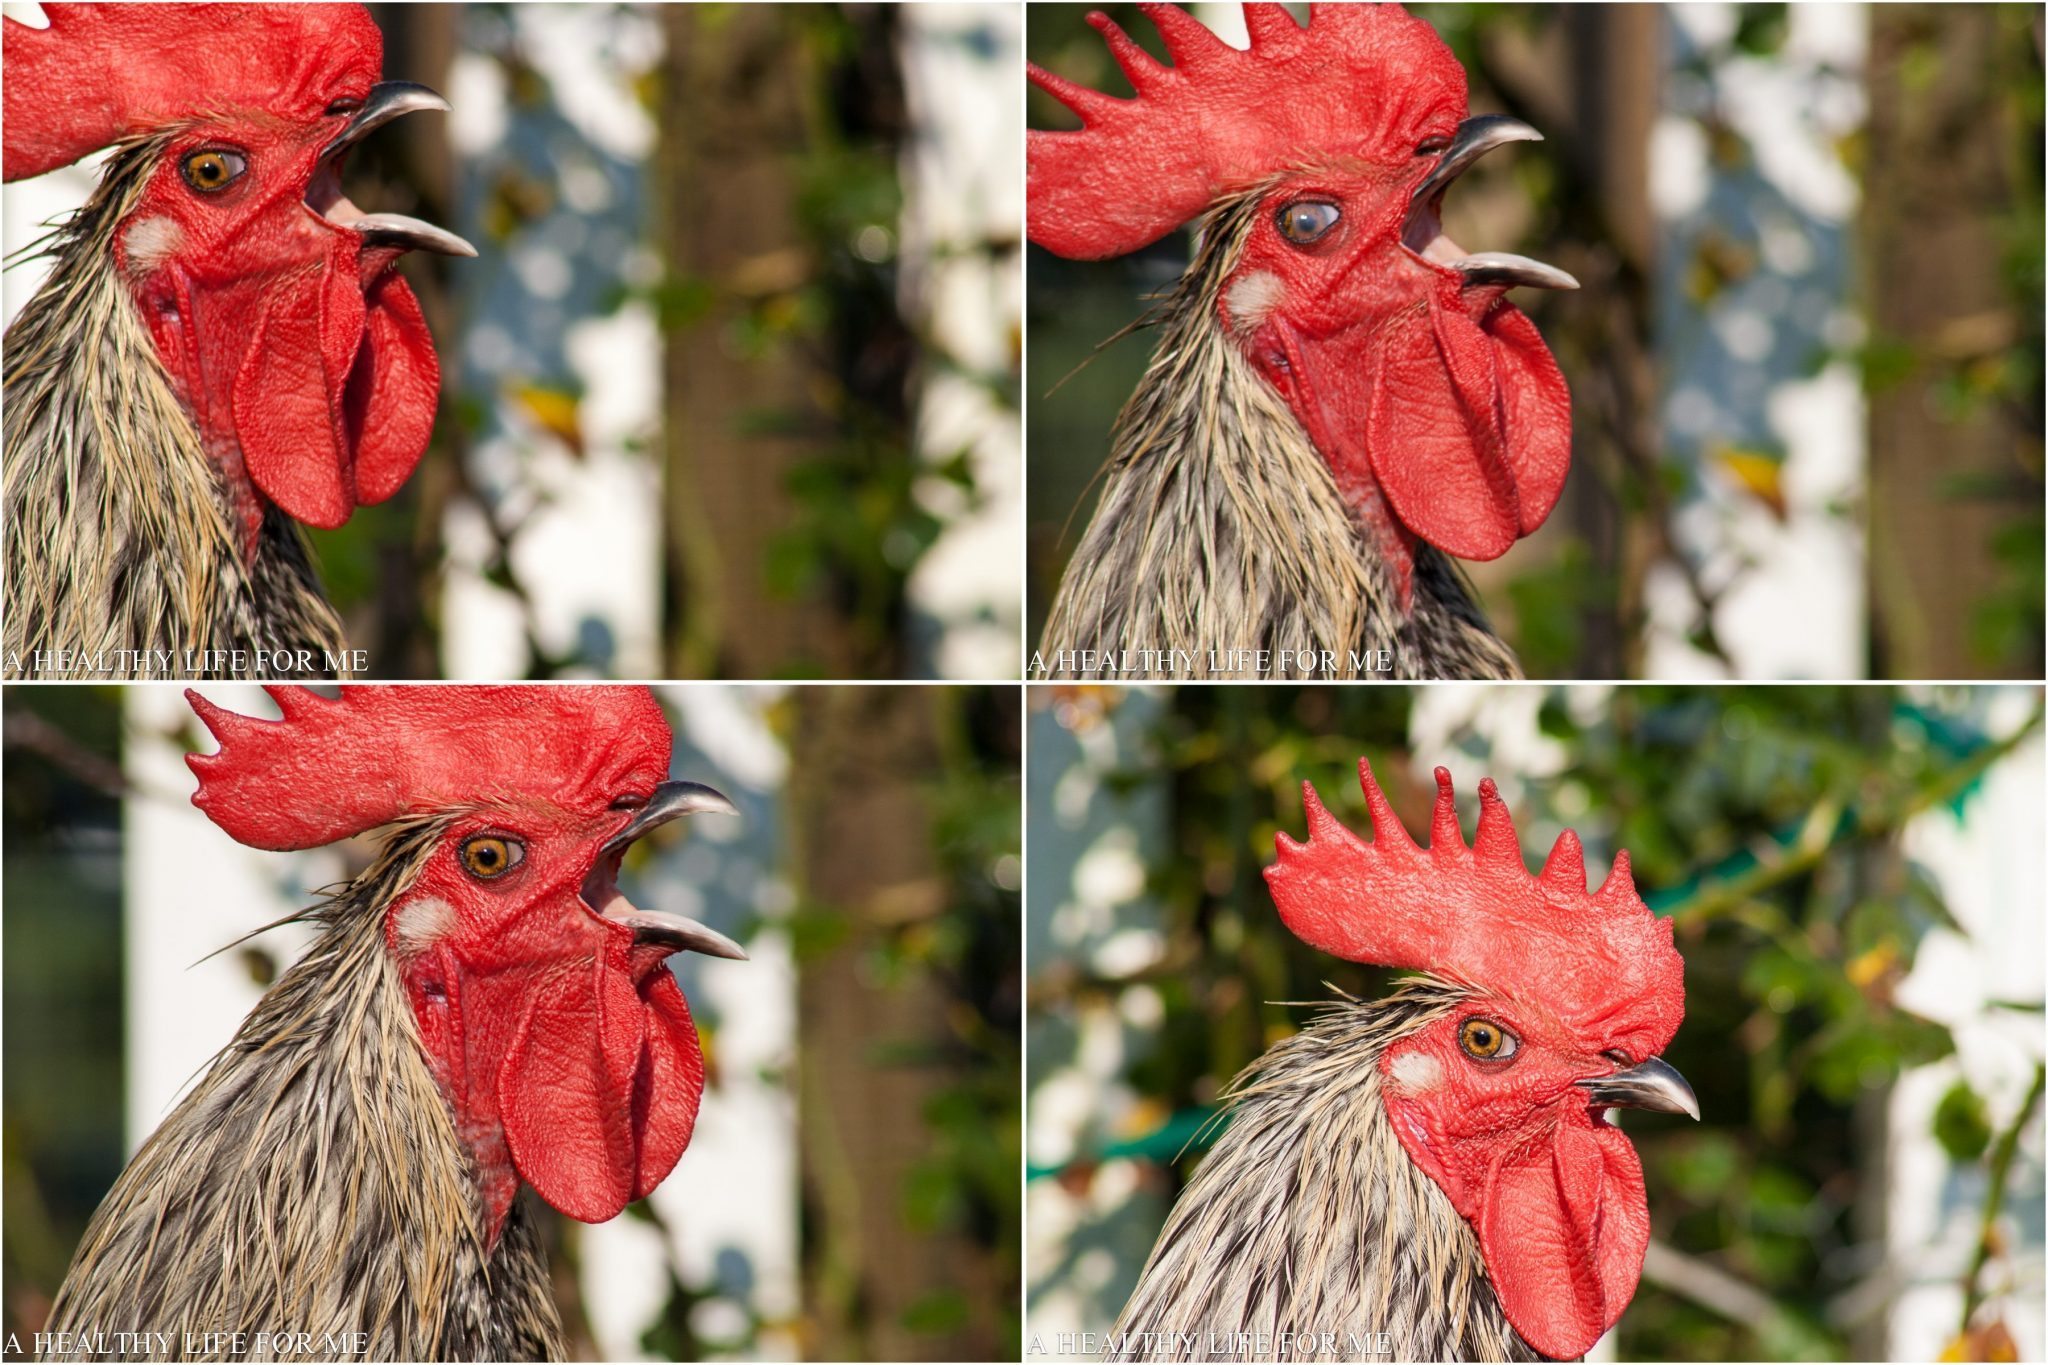 Four pictures of a rooster crowing, with one picture feating a transparent eyelid blinking